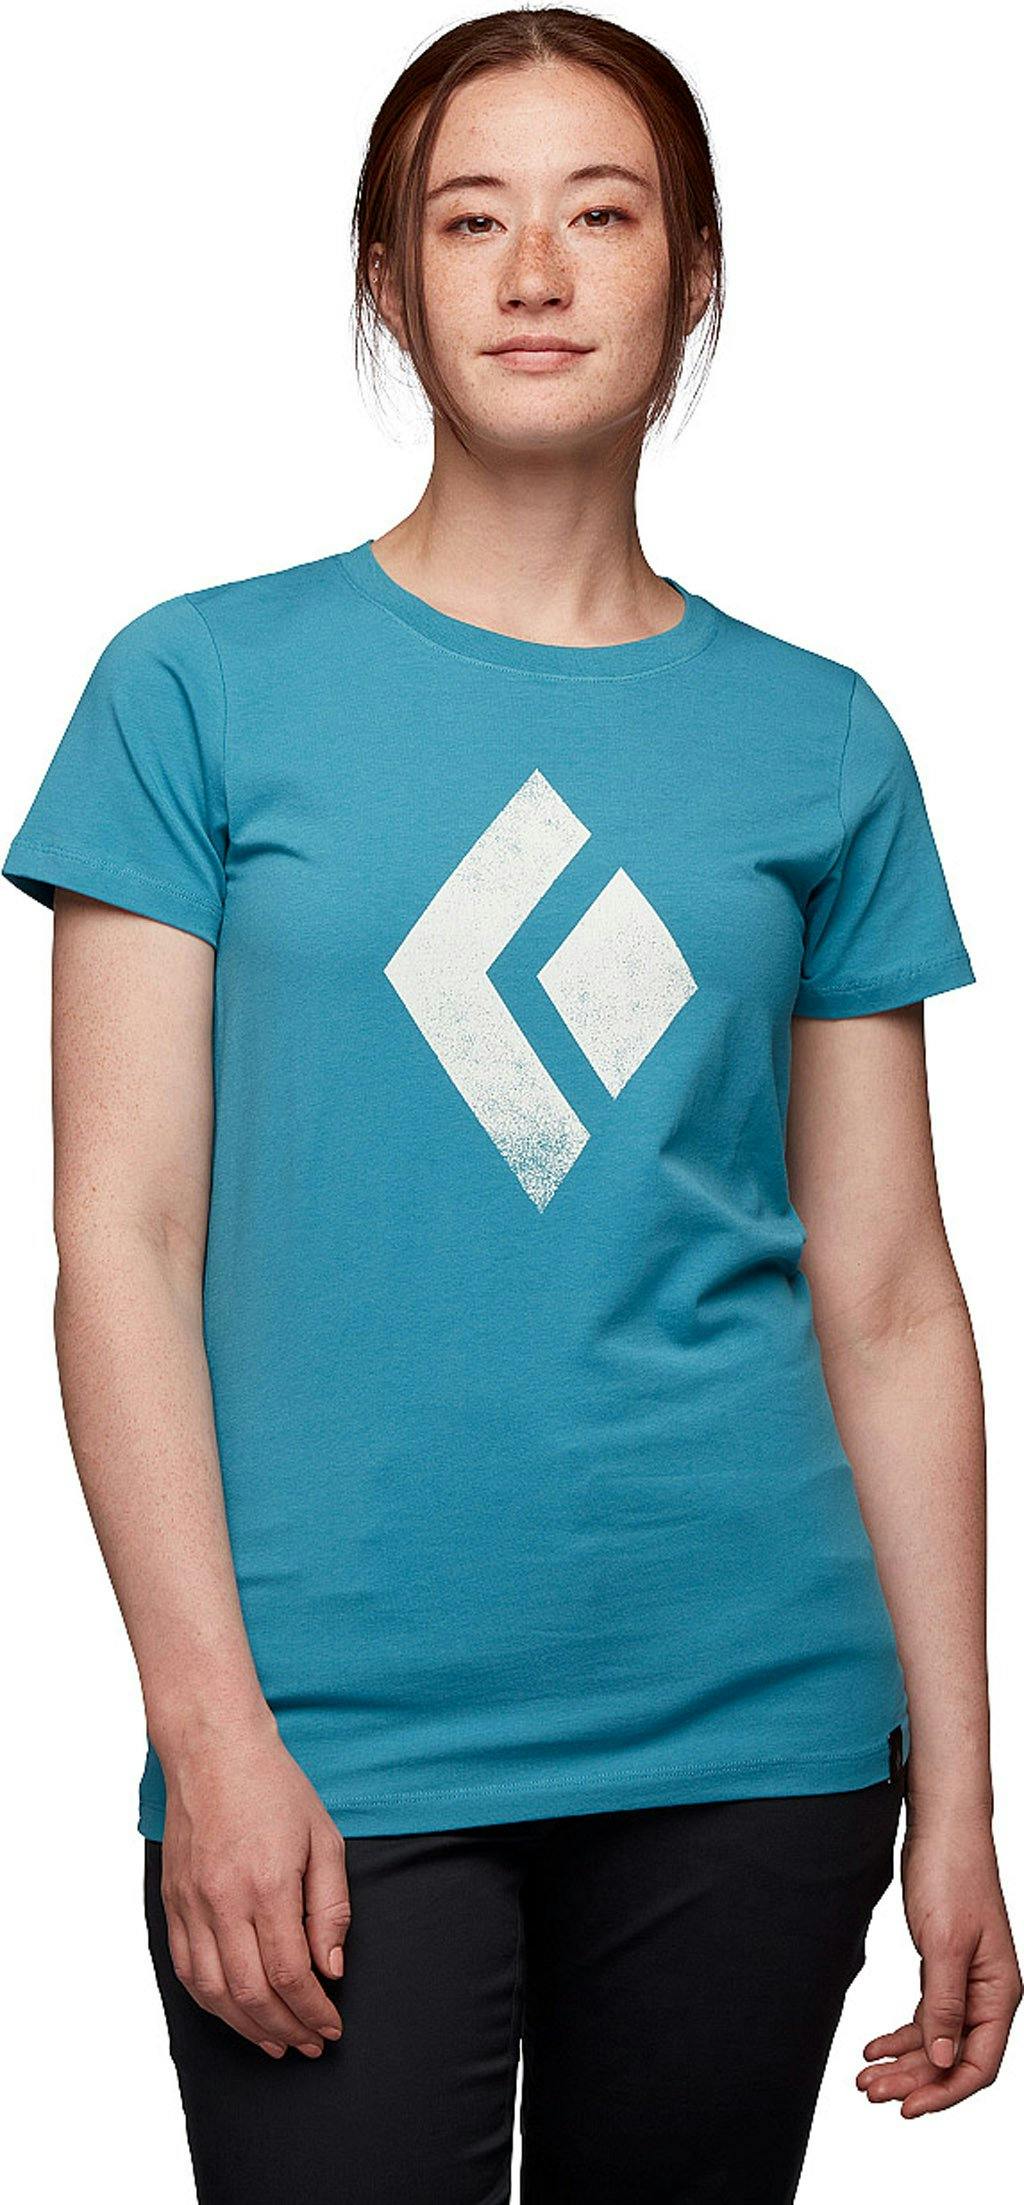 Product image for Chalked Up Tee - Women's